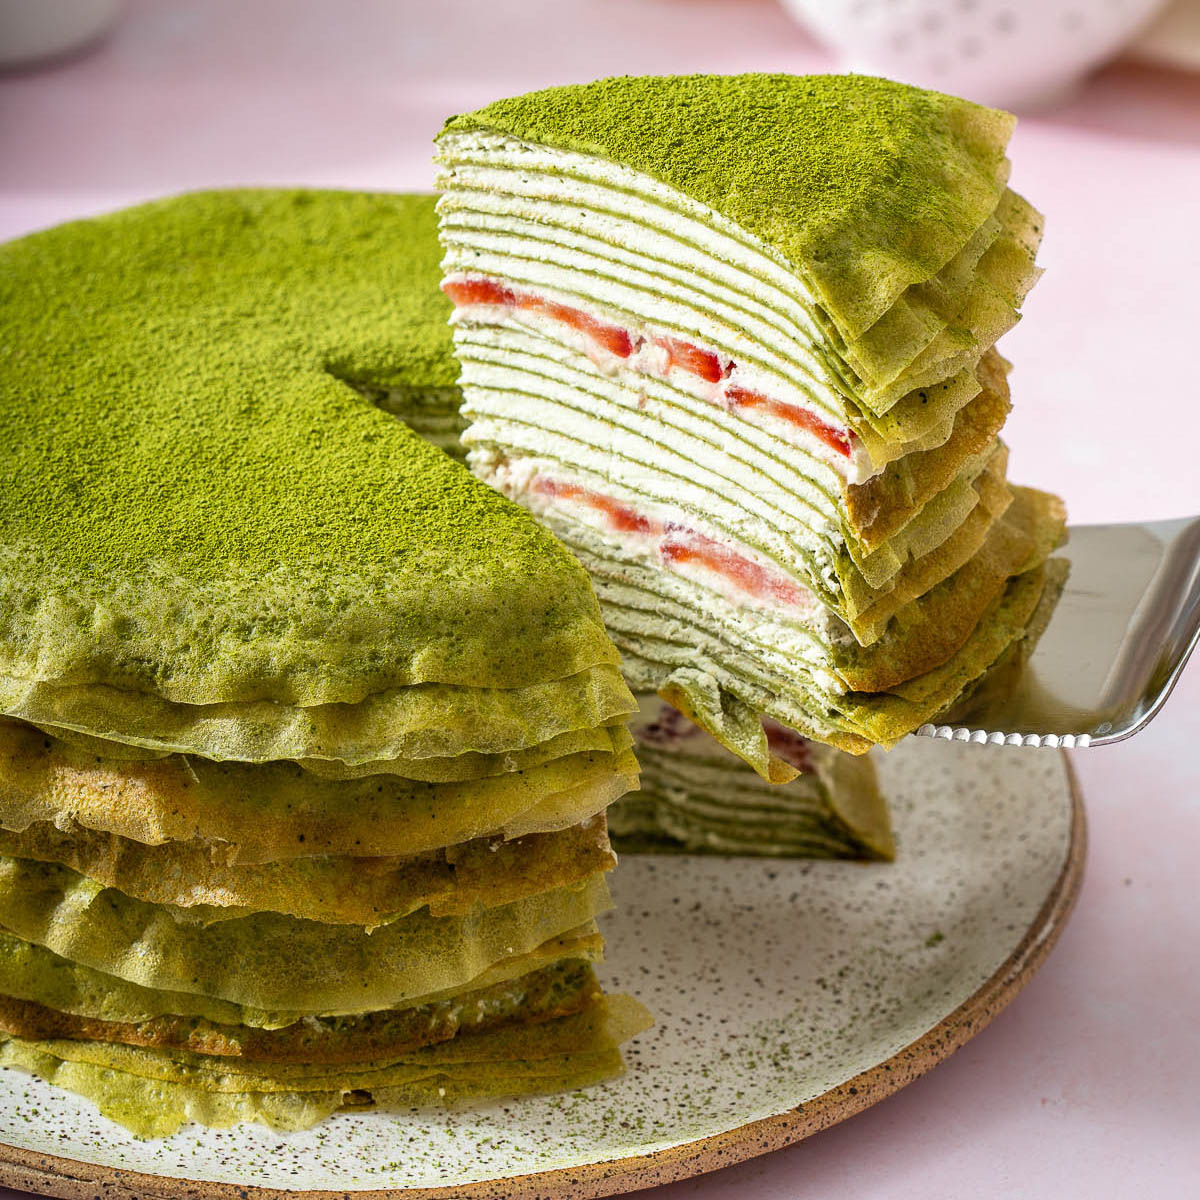 Up close of a slice of cake being lifted from a matcha crepe cake.